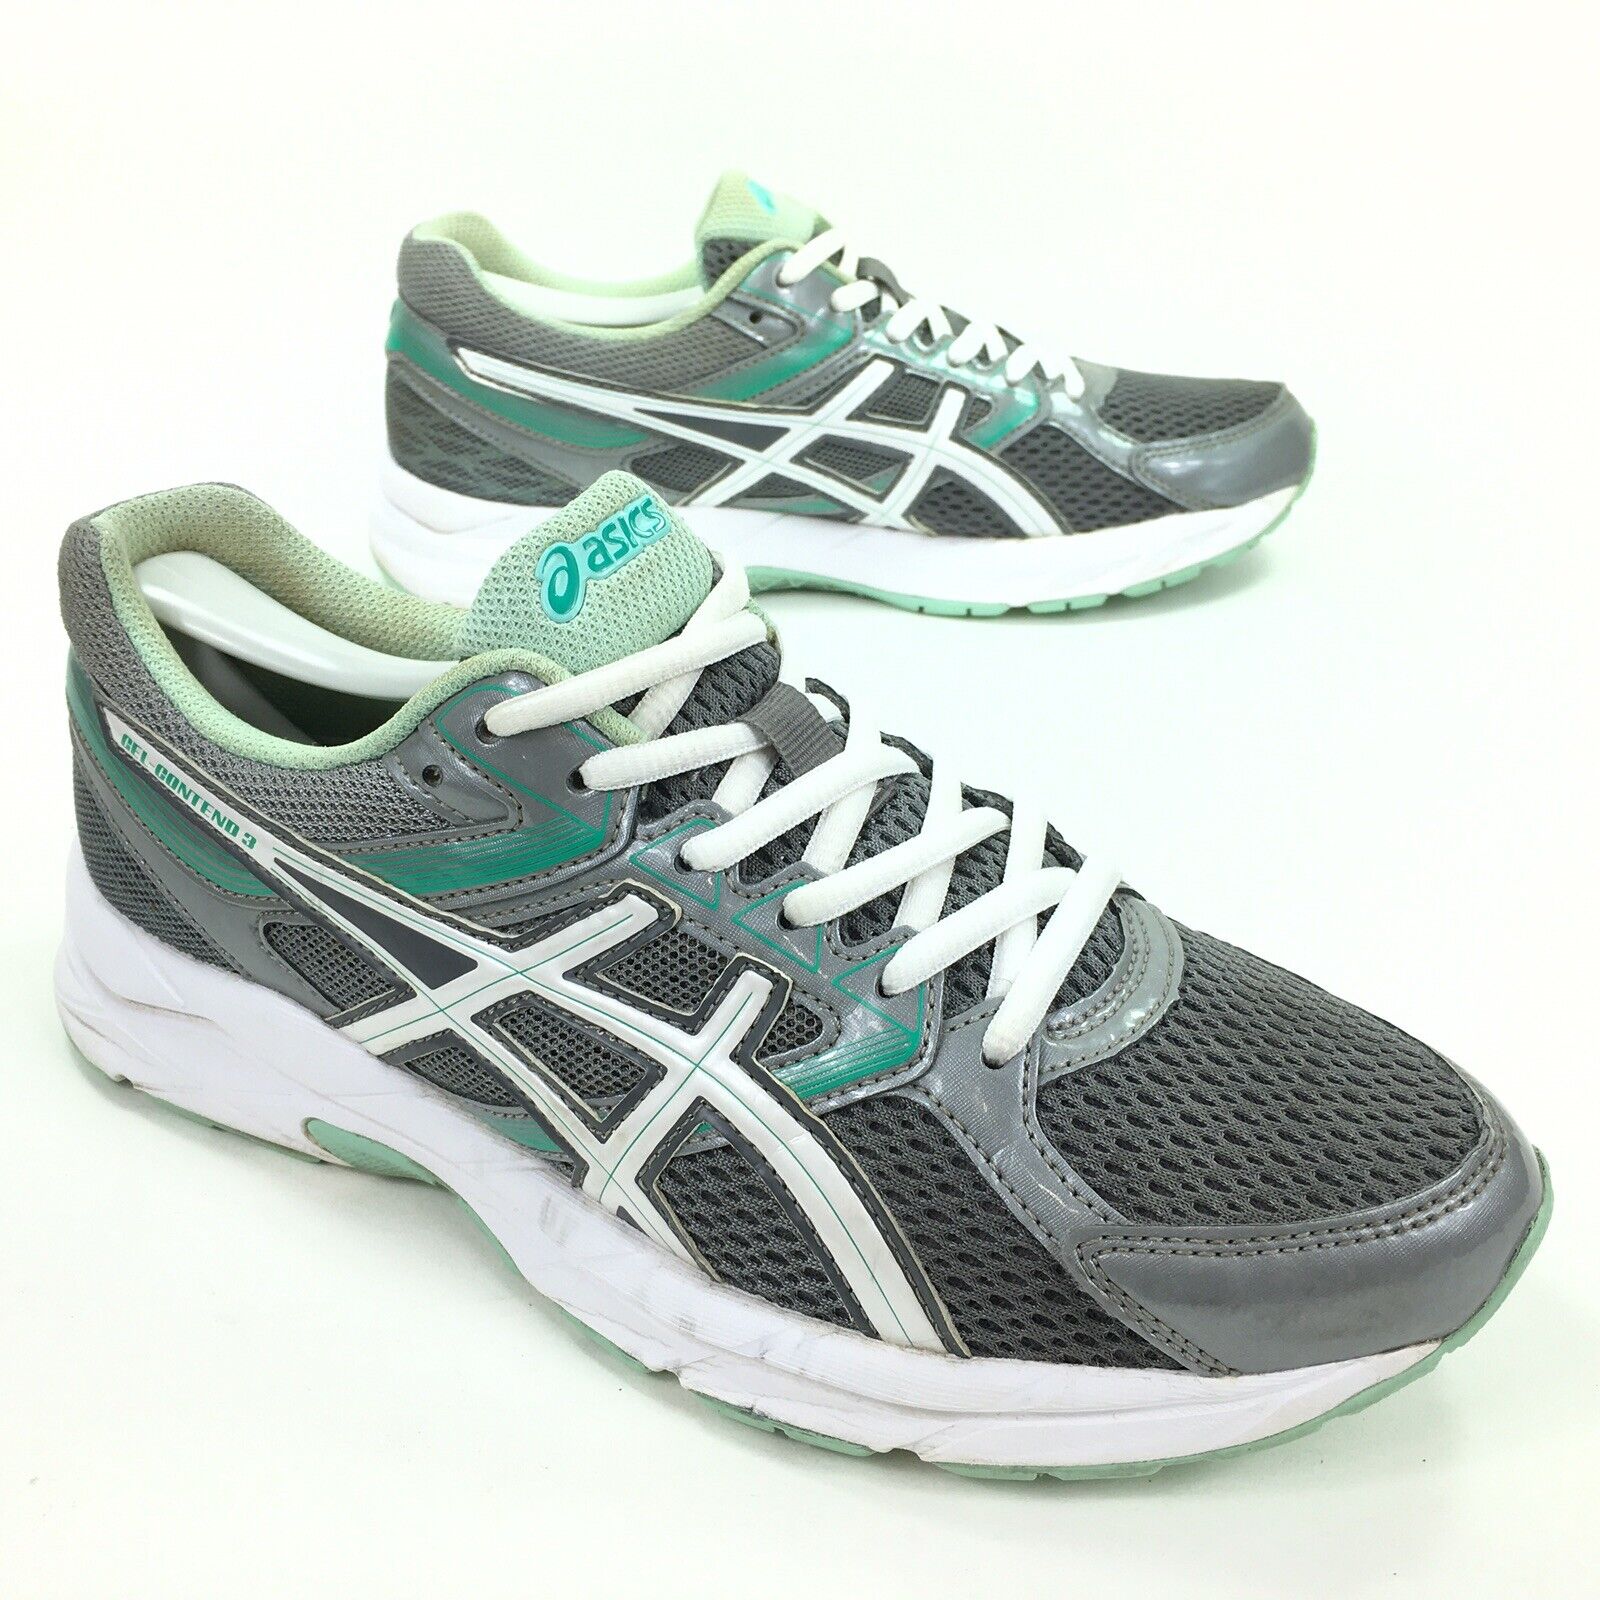 Asics Women's Gel Contend 3 Athletic Running Shoes Lace Up Low Top Size 8 Gray